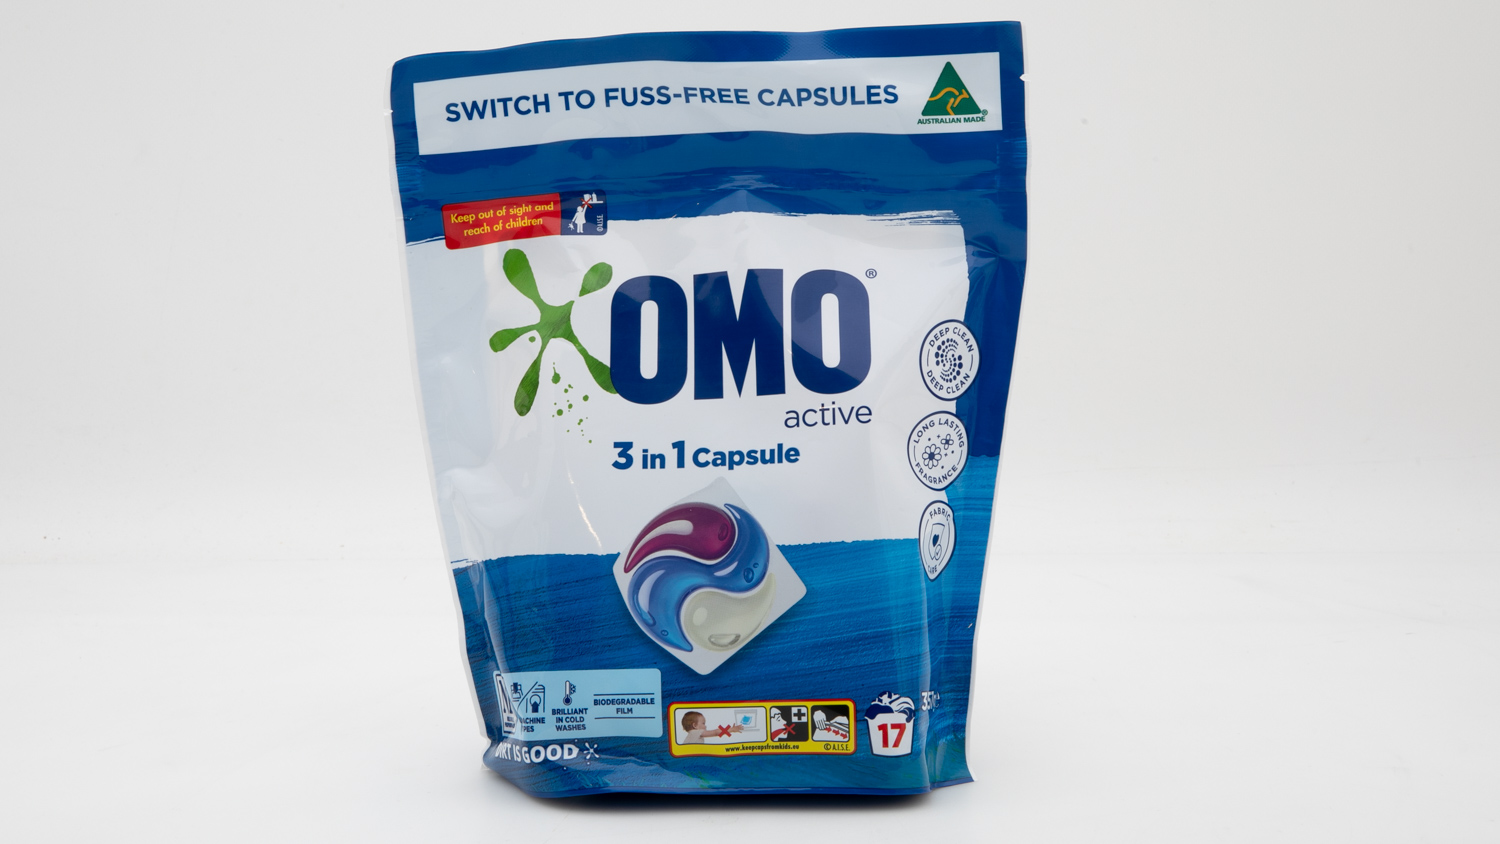 Omo 3 in 1 Active 17 Capsules 357g Top Loader carousel image